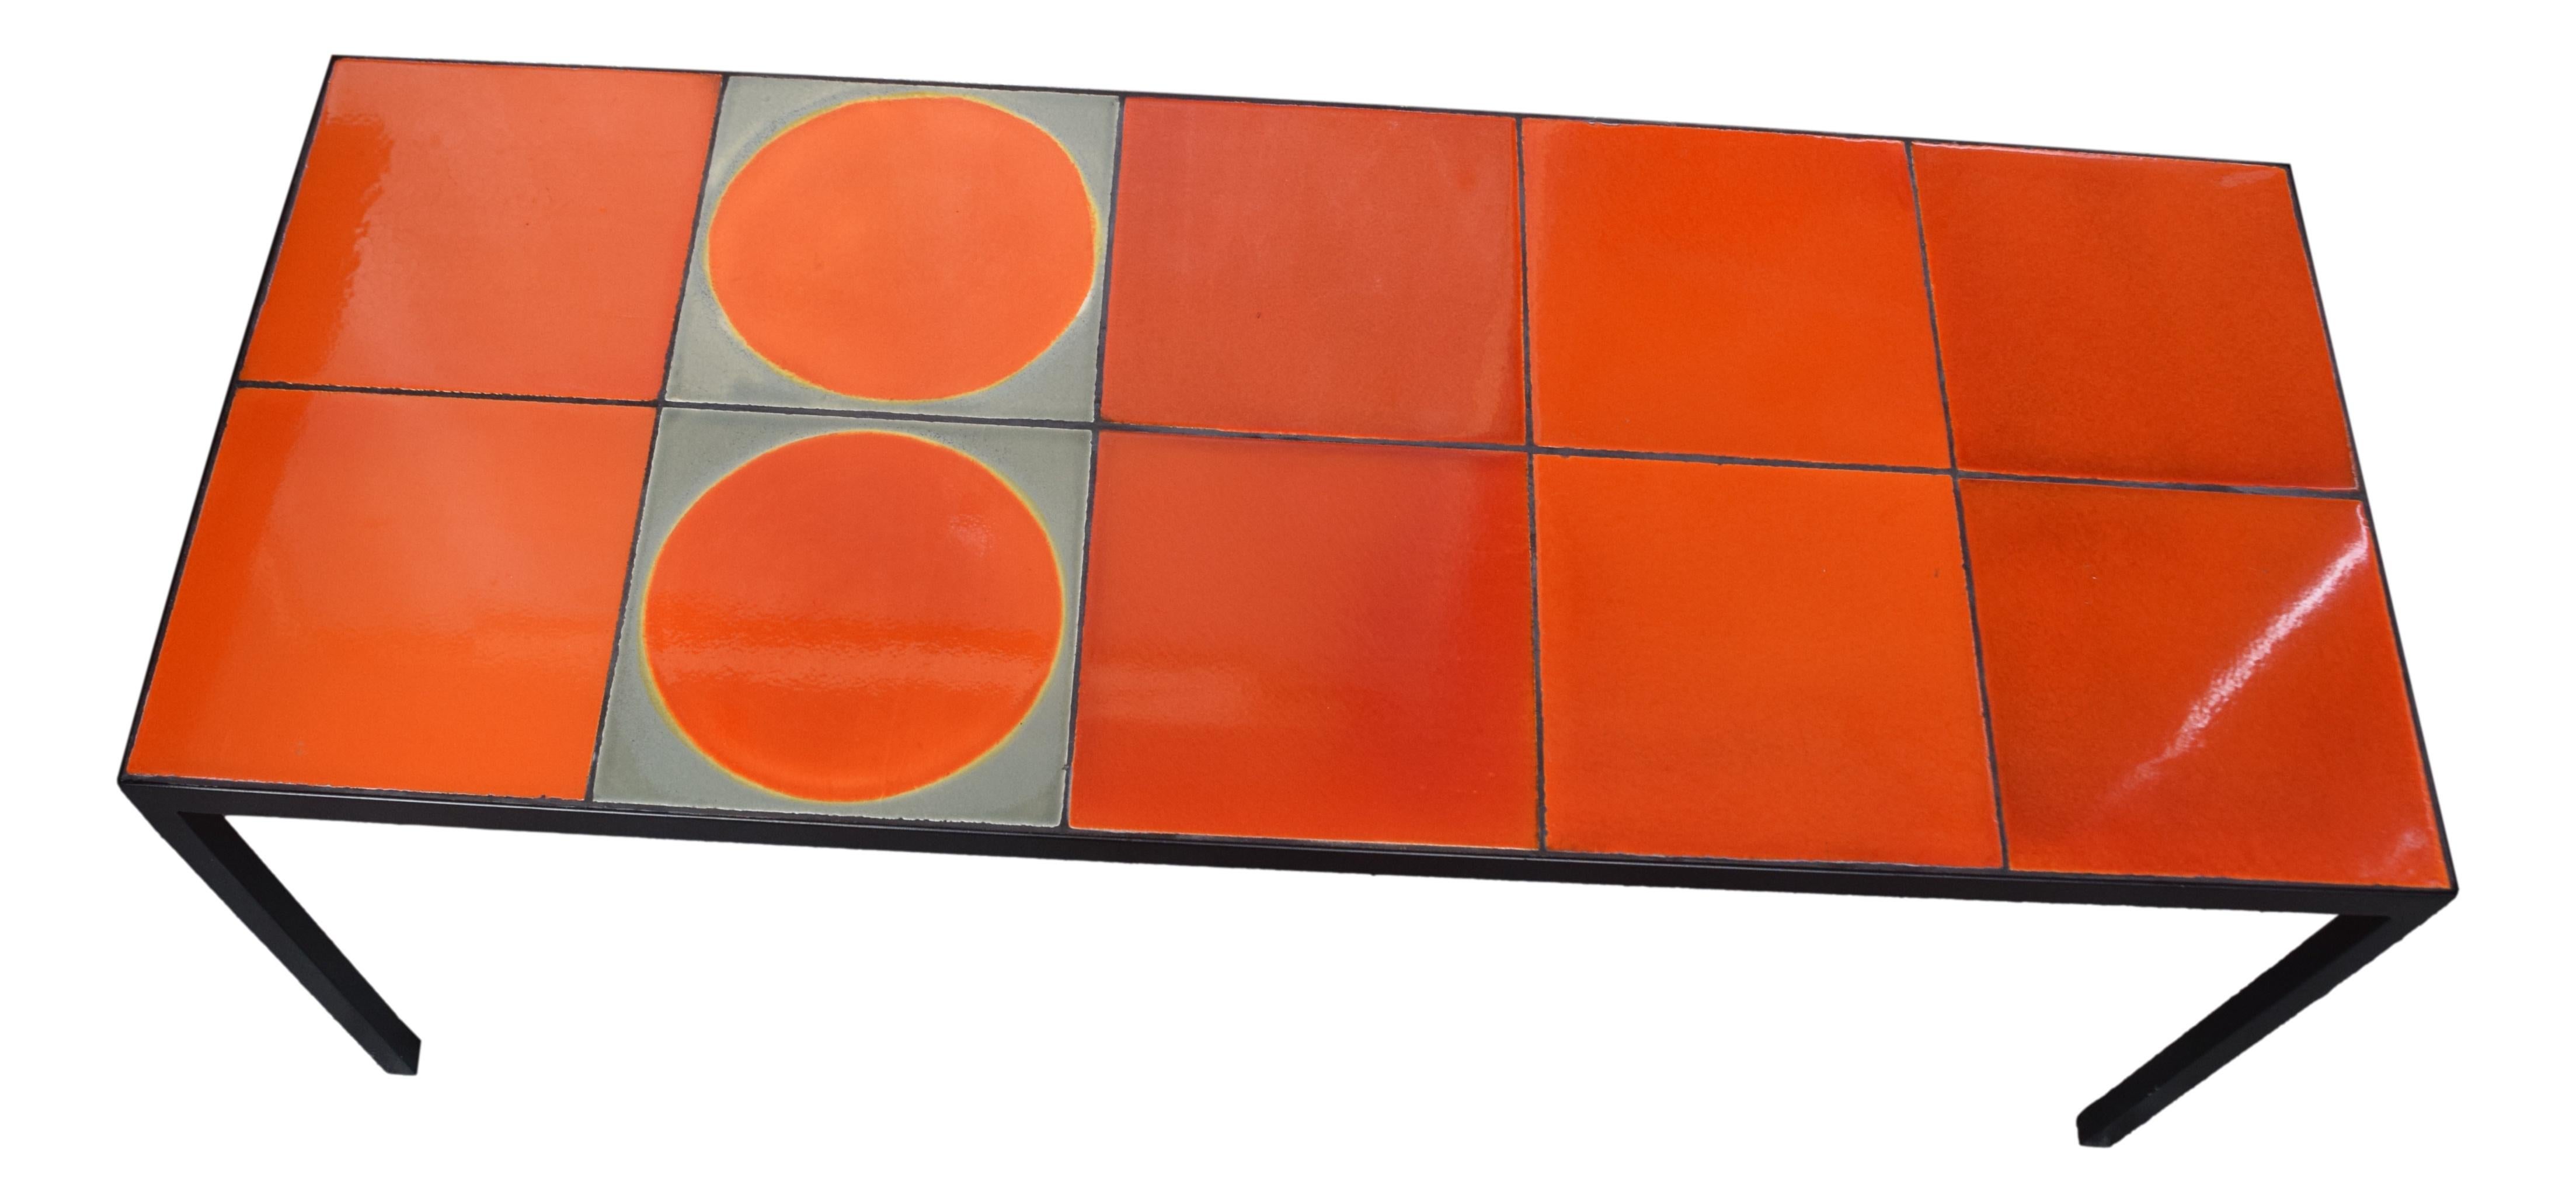 Painted Gueridon Coffee Table with 10 Ceramic Tiles by Roger Capron For Sale